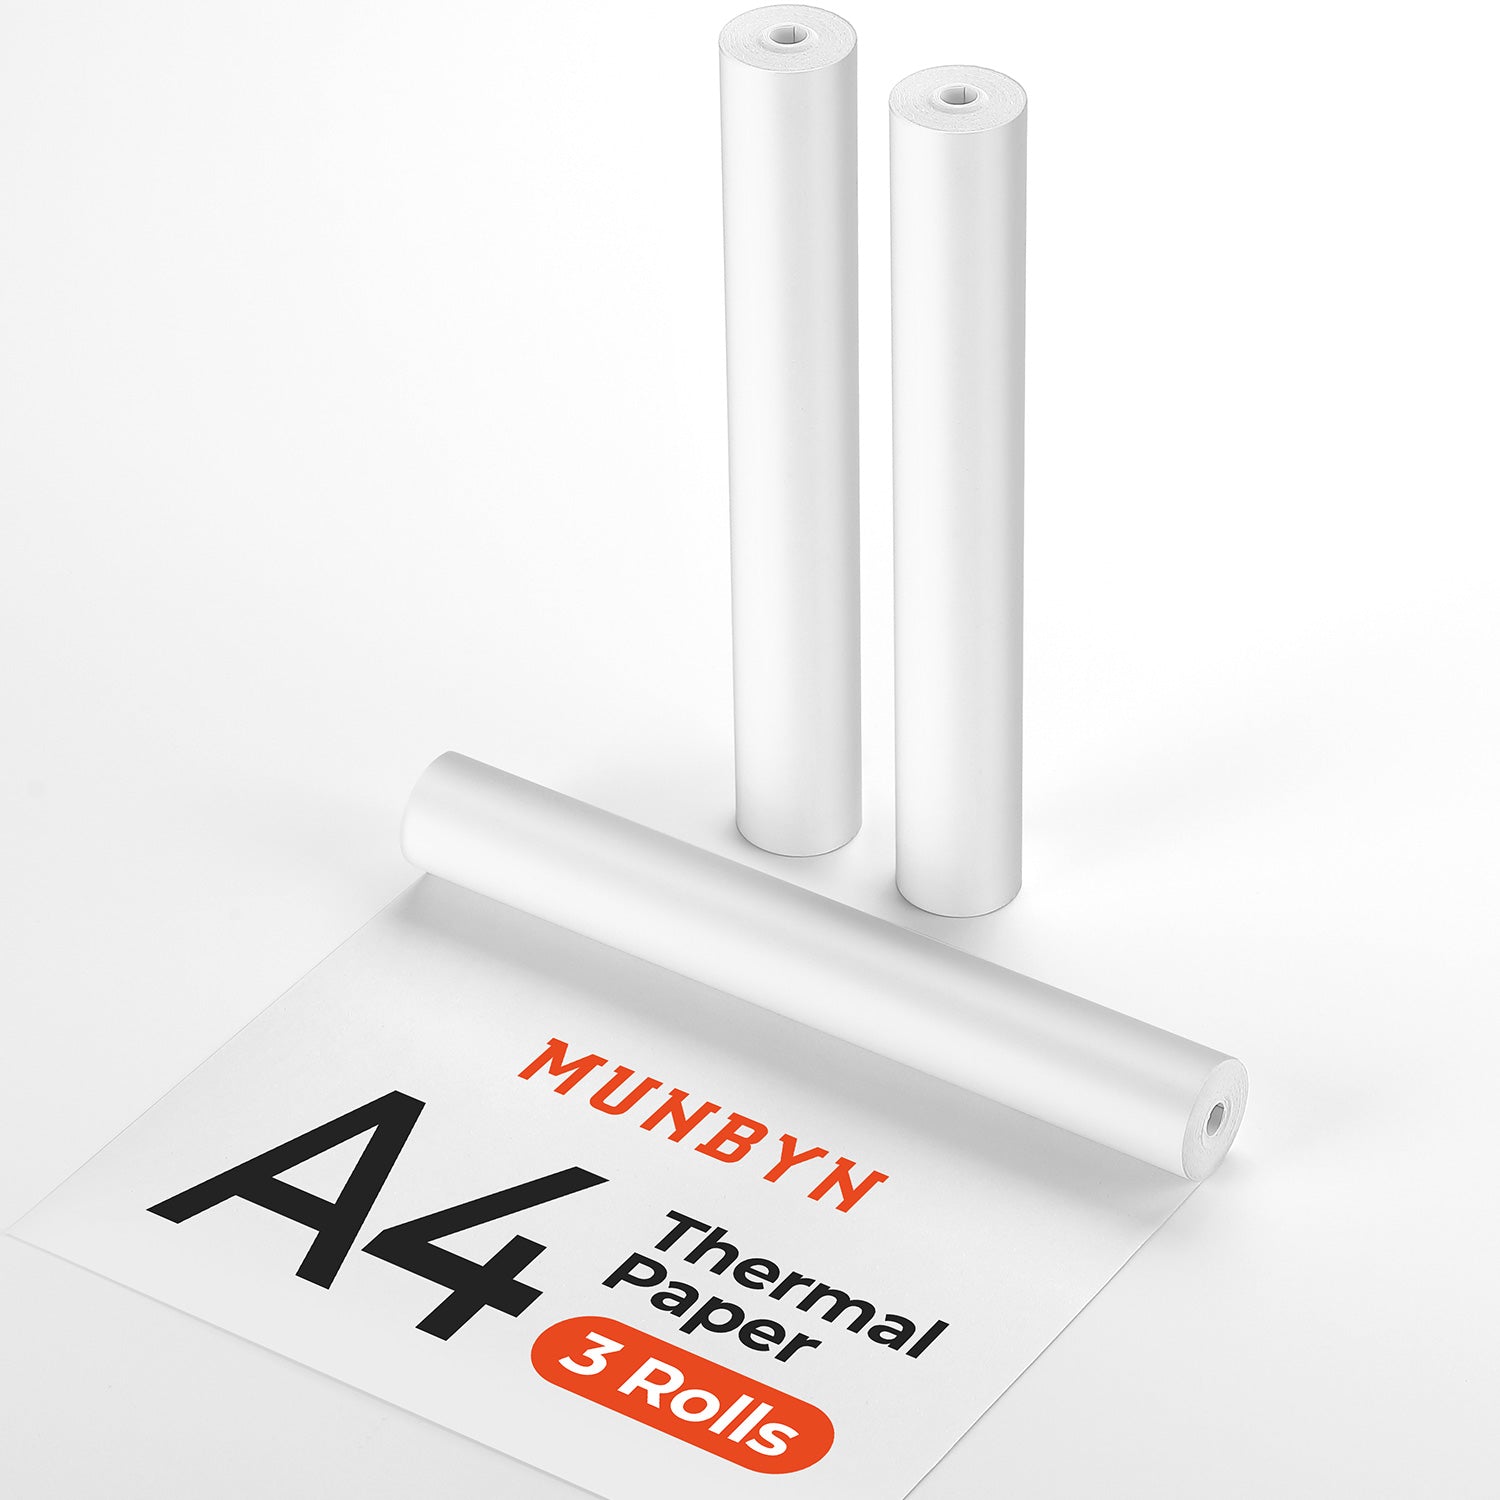 MUNBYN A4 thermal paper rolls are 3 rolls per pack.